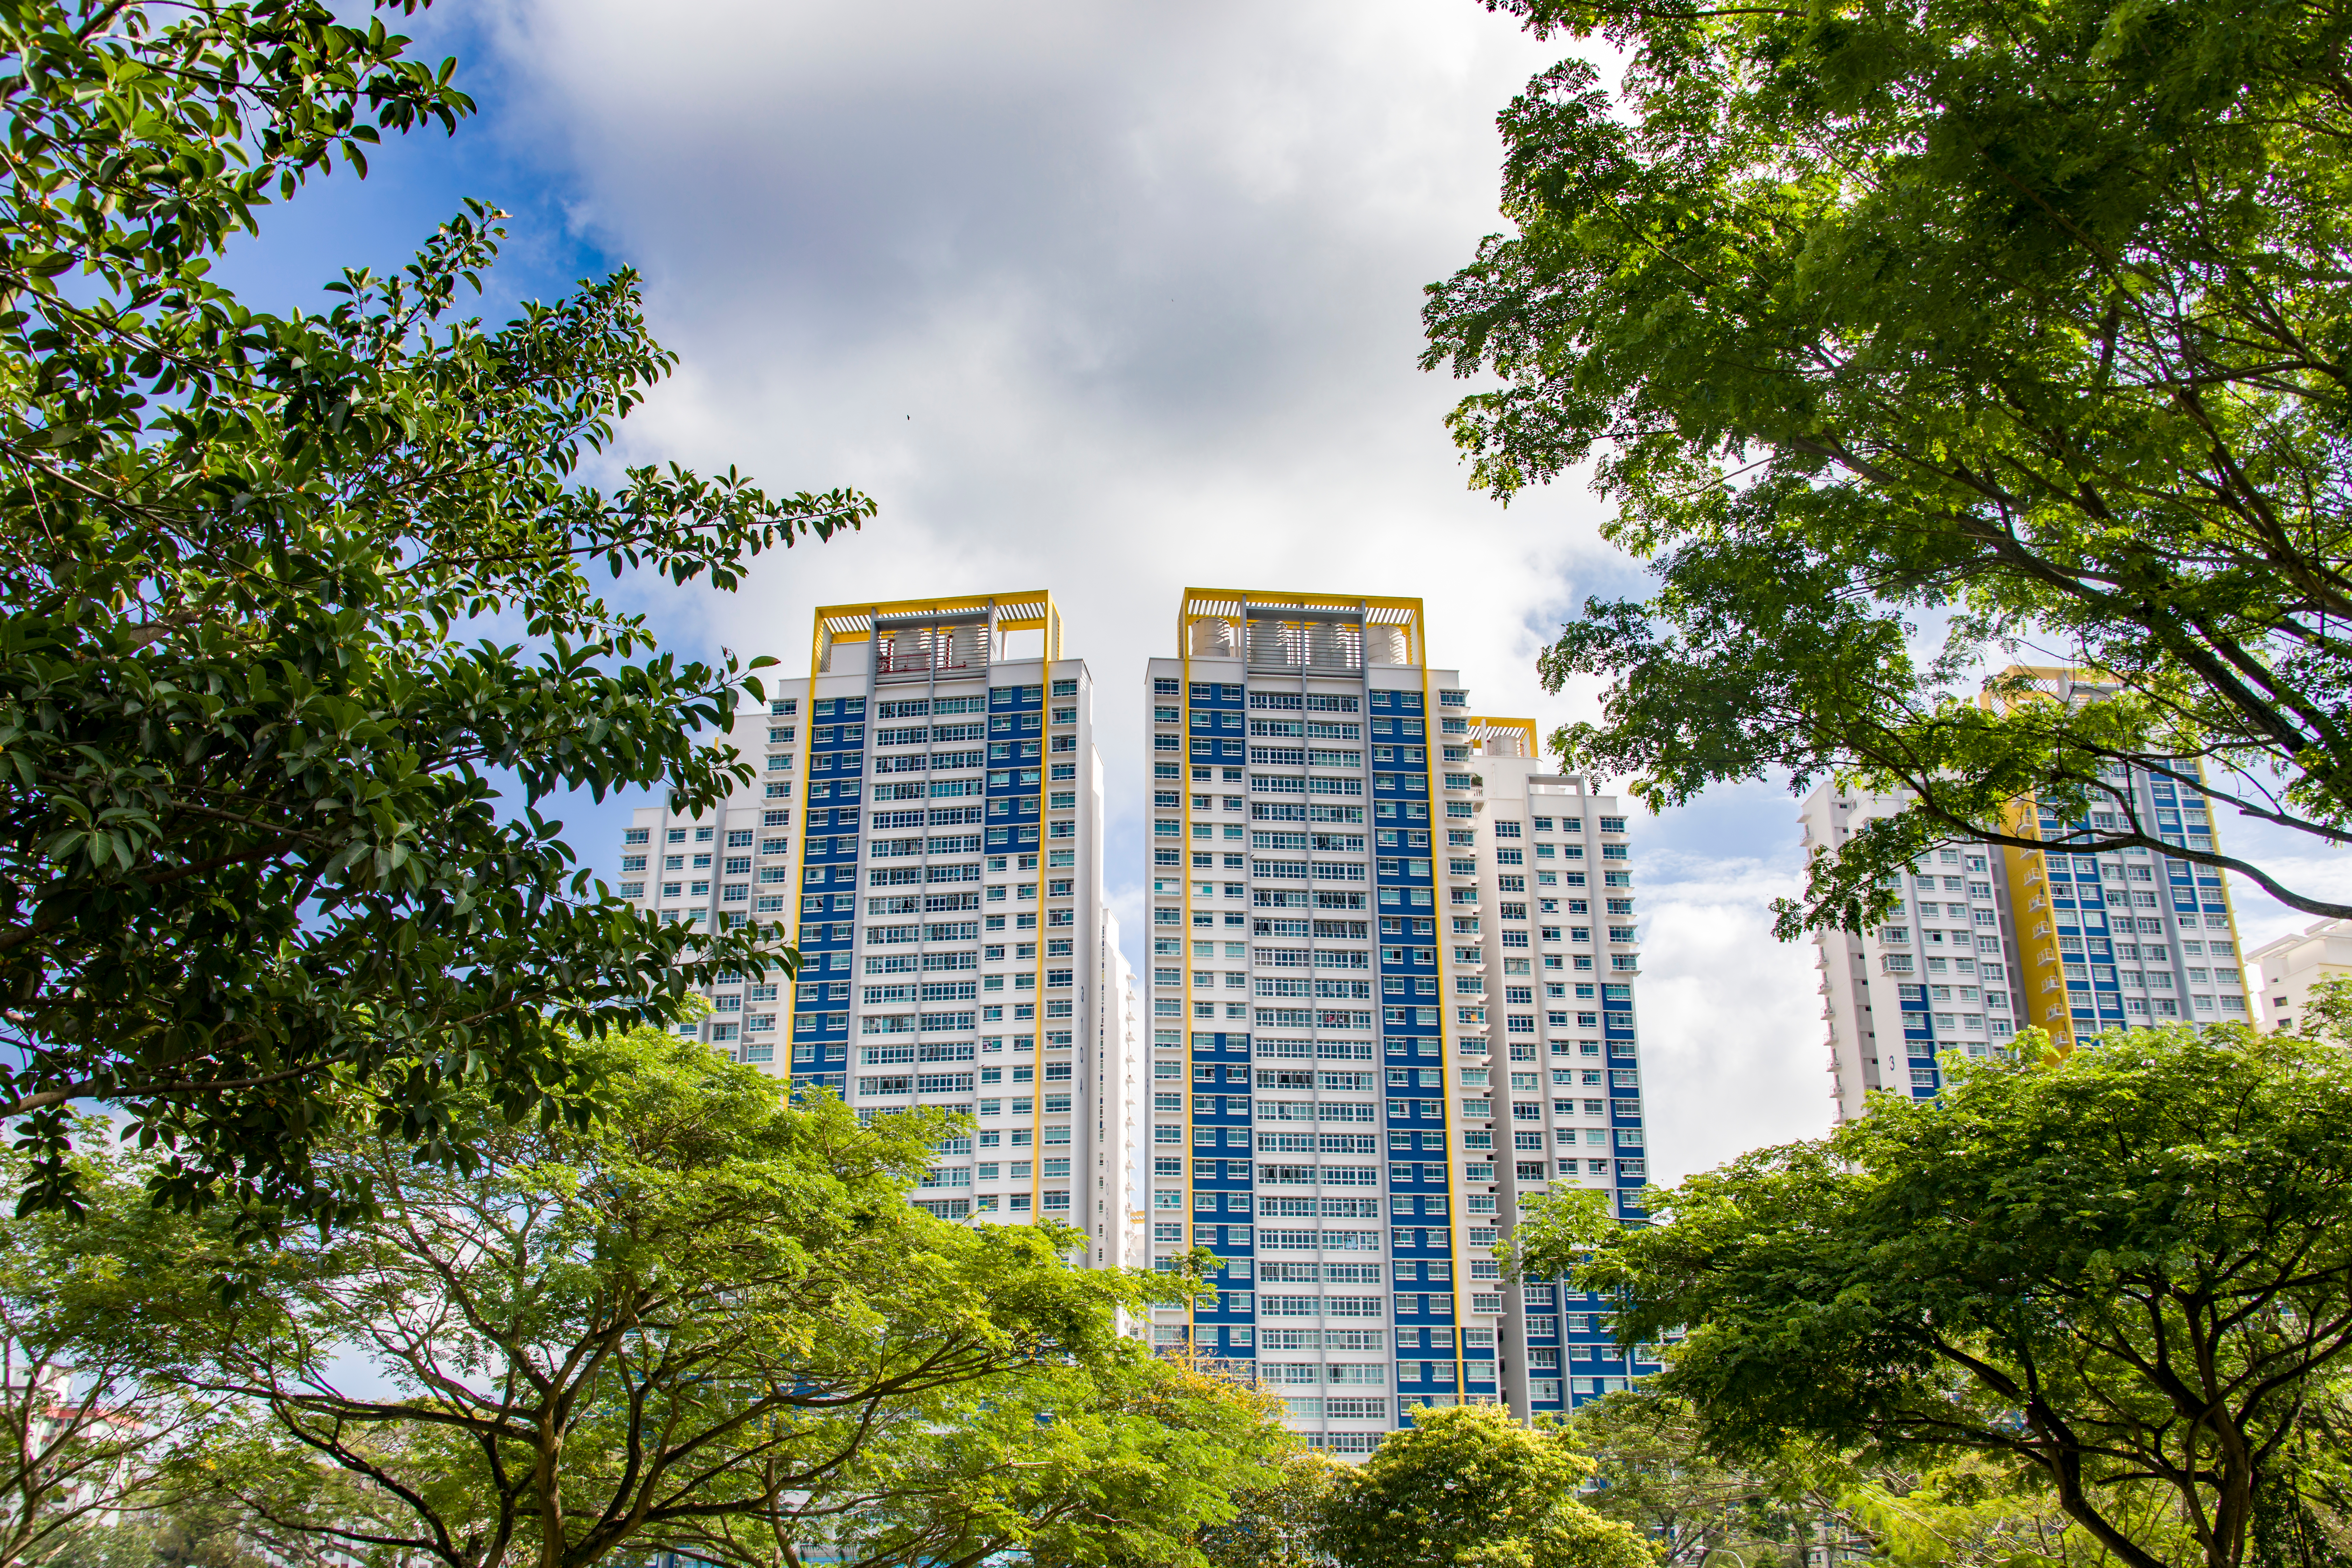 New Singapore Housing Loan Rules In 2022 – How Much Can You Borrow?